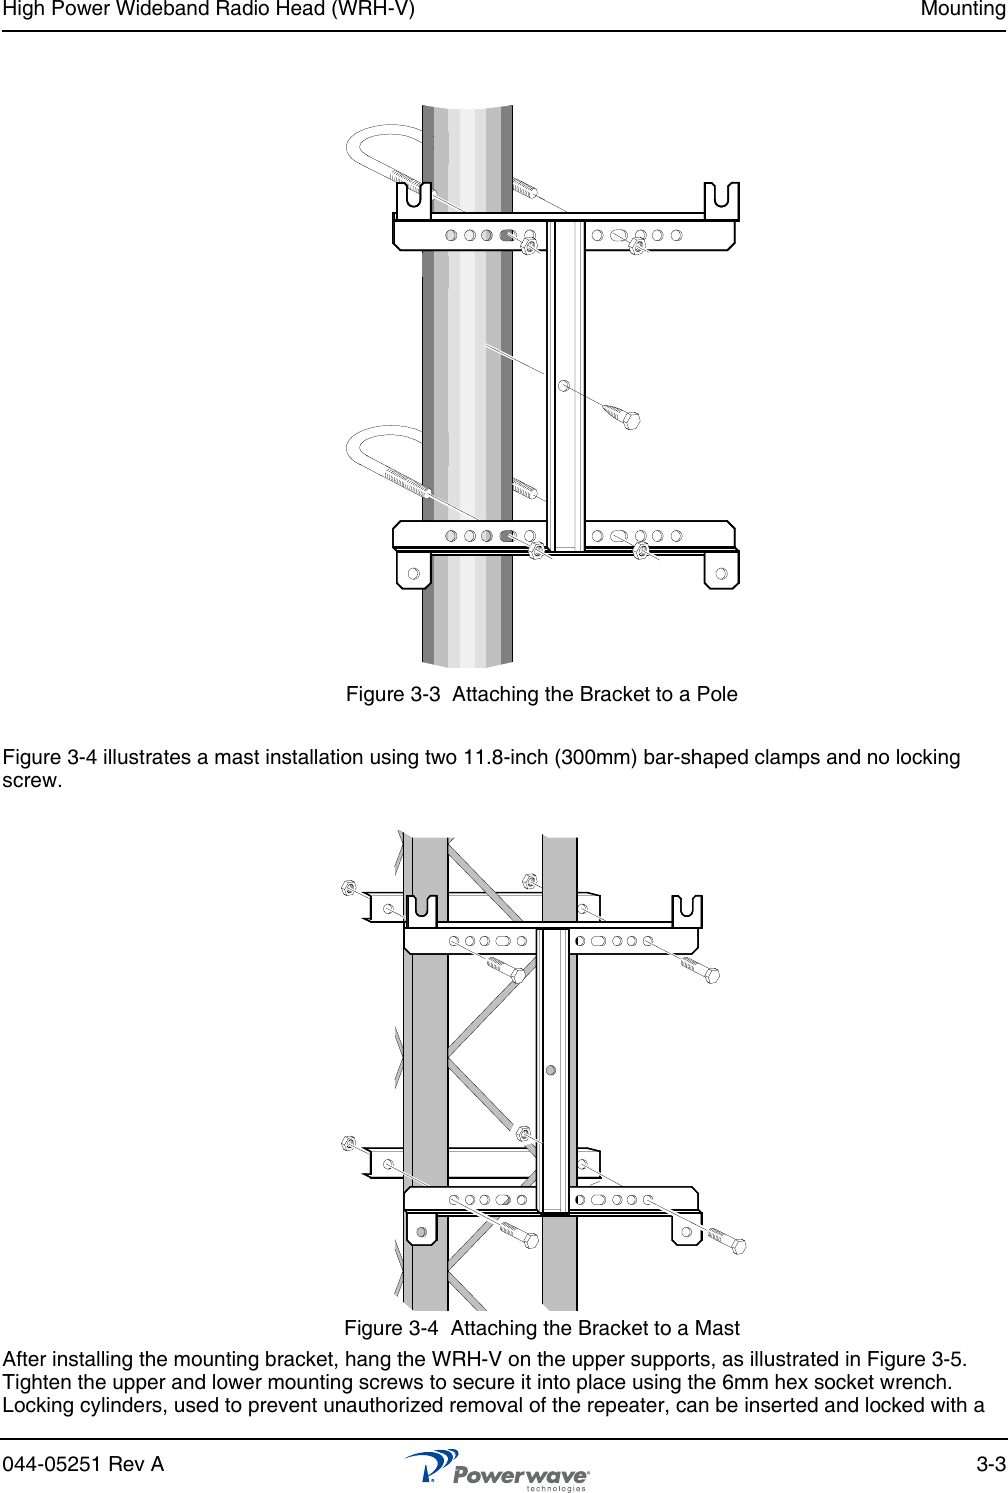 High Power Wideband Radio Head (WRH-V) Mounting044-05251 Rev A 3-3Figure 3-3  Attaching the Bracket to a PoleFigure 3-4 illustrates a mast installation using two 11.8-inch (300mm) bar-shaped clamps and no locking screw.Figure 3-4  Attaching the Bracket to a MastAfter installing the mounting bracket, hang the WRH-V on the upper supports, as illustrated in Figure 3-5. Tighten the upper and lower mounting screws to secure it into place using the 6mm hex socket wrench. Locking cylinders, used to prevent unauthorized removal of the repeater, can be inserted and locked with a 